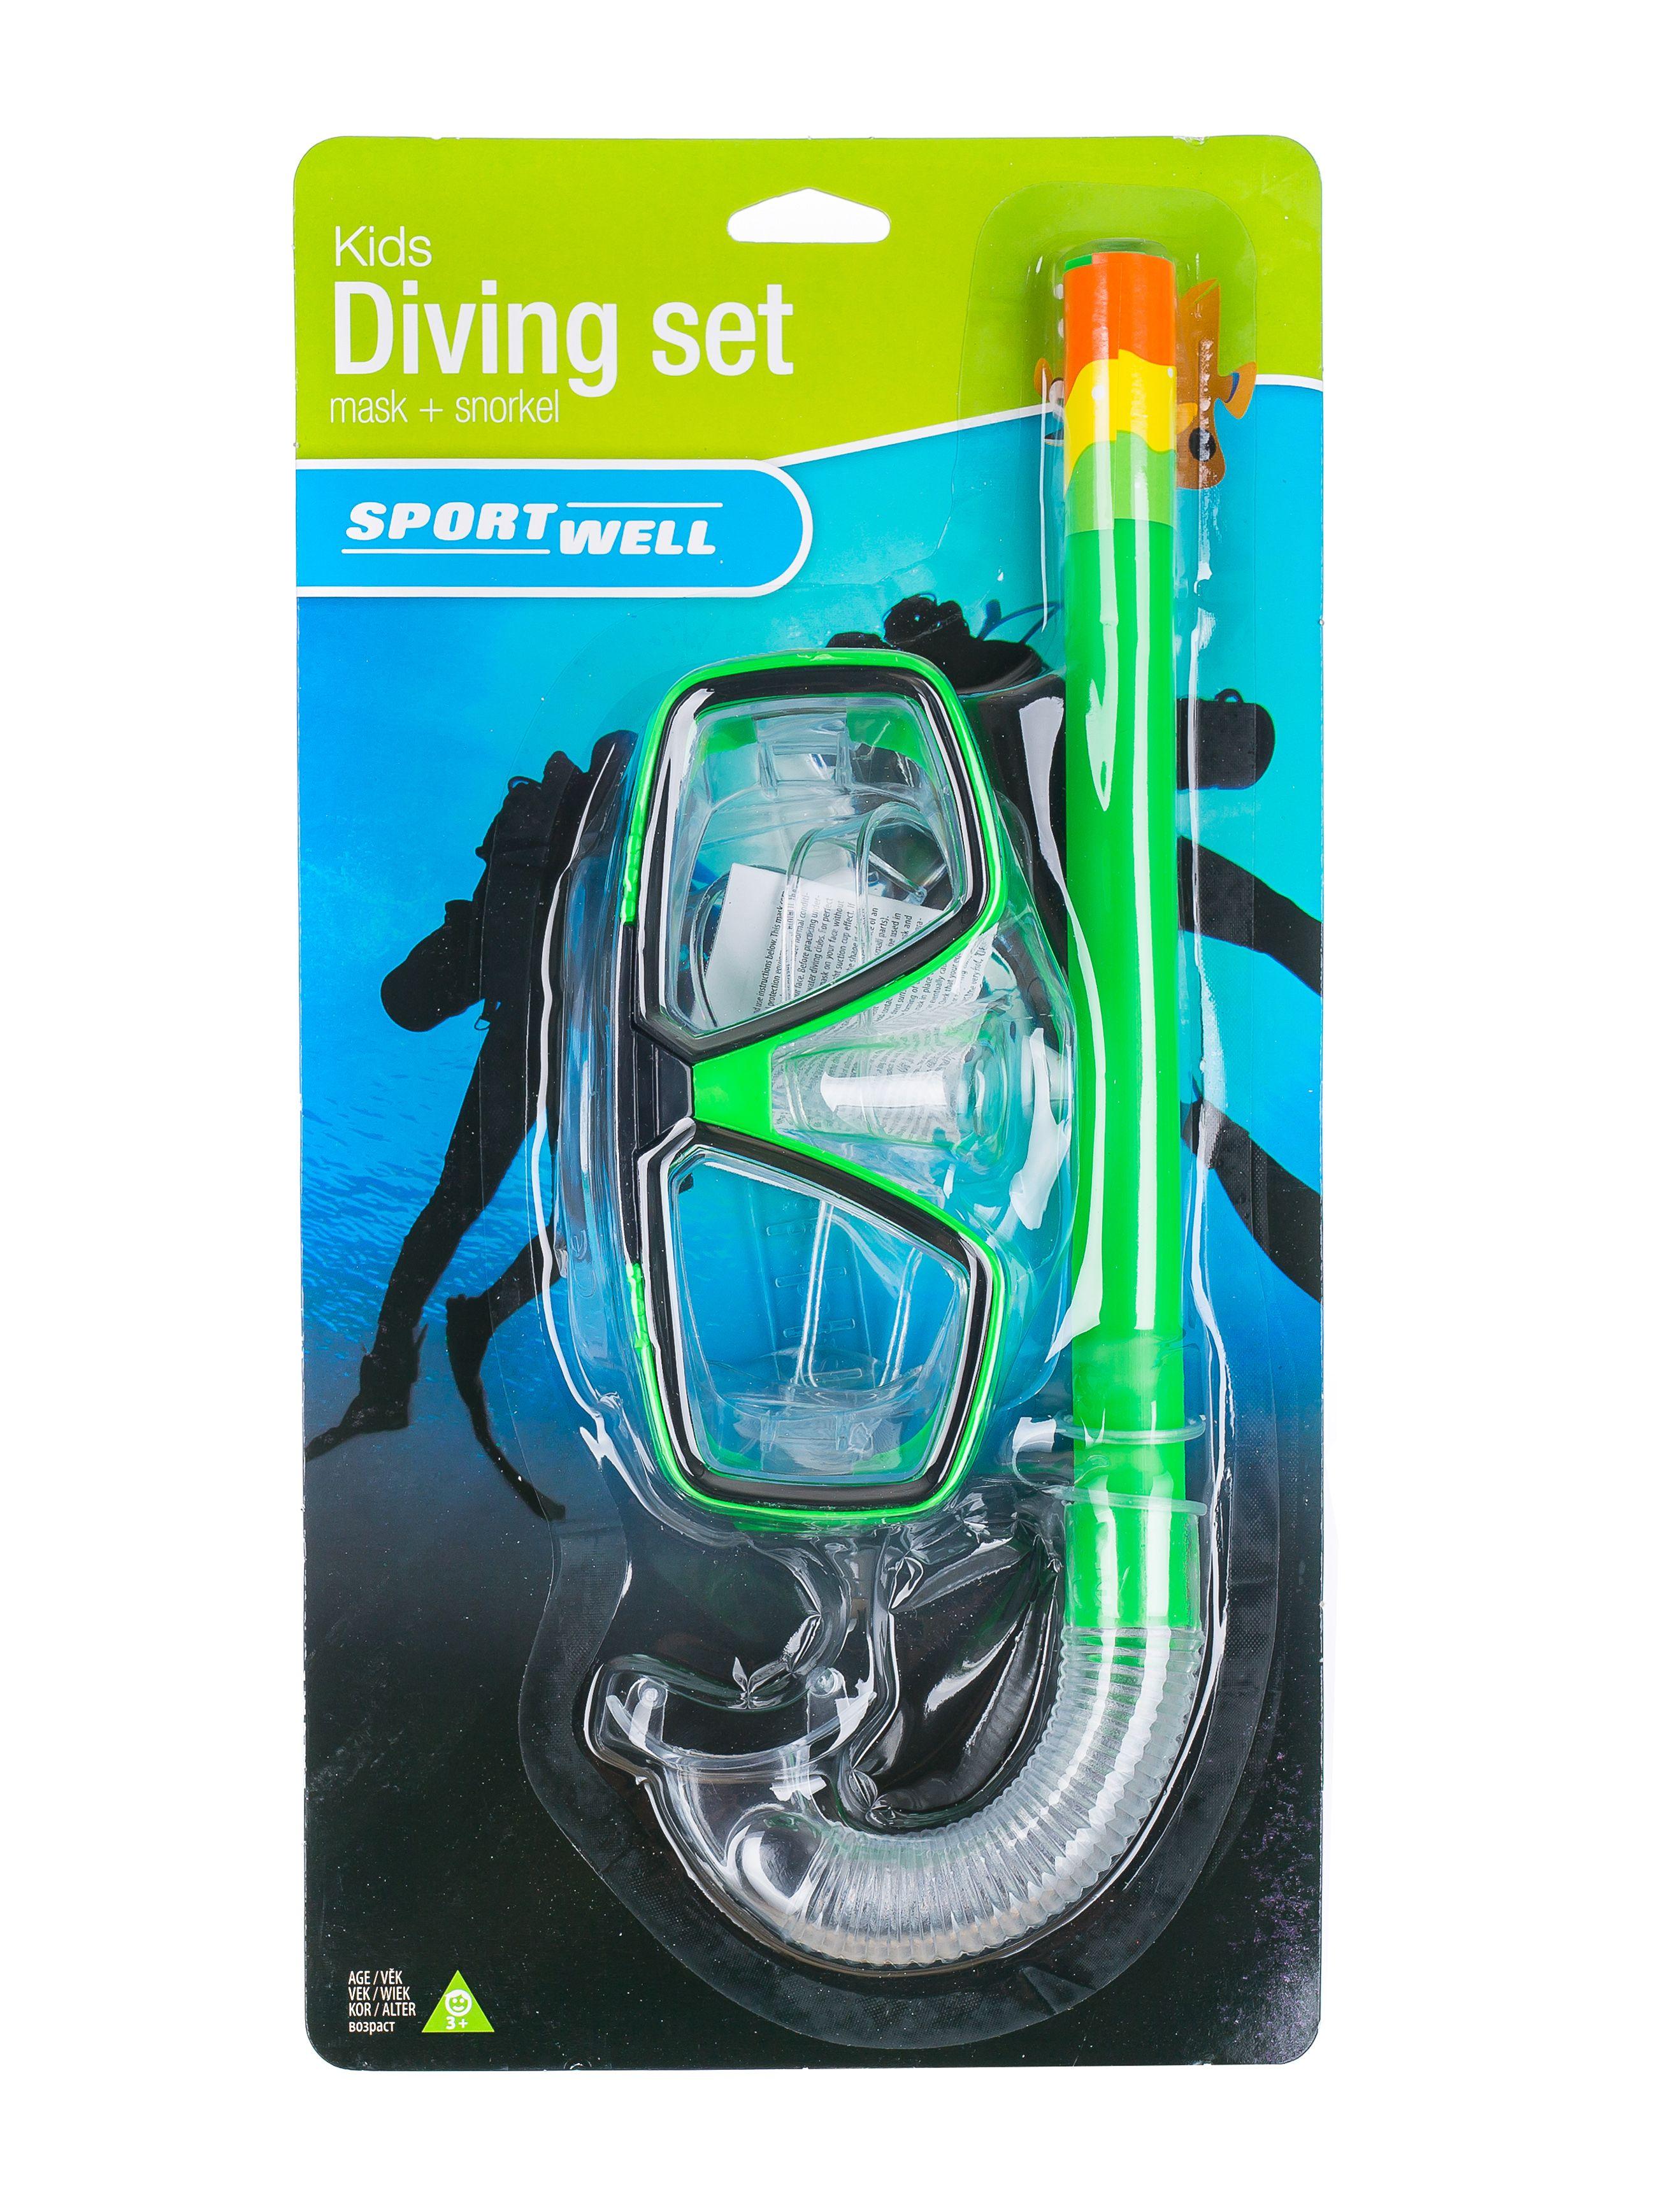 Diving kit for adults